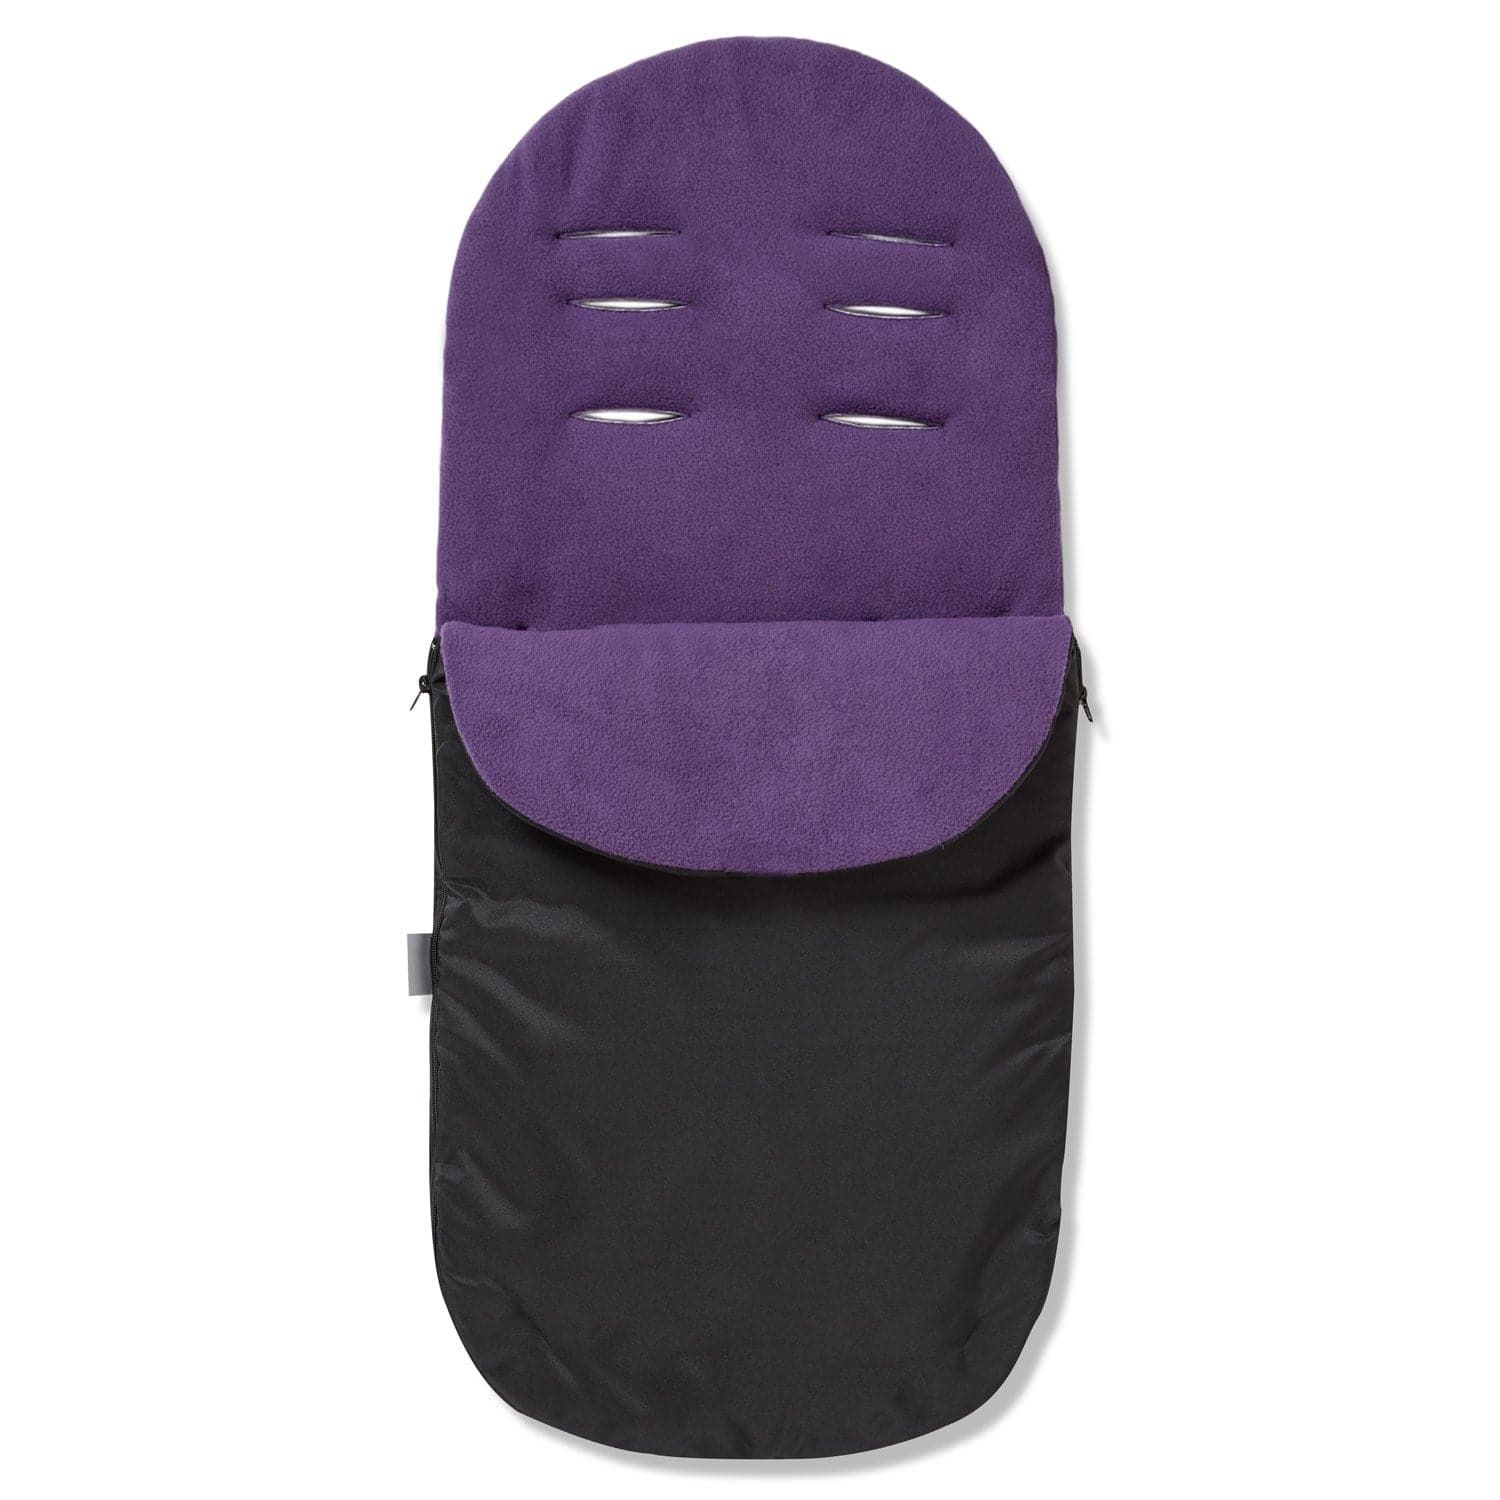 Footmuff / Cosy Toes Compatible with Unilove - Purple / Fits All Models | For Your Little One